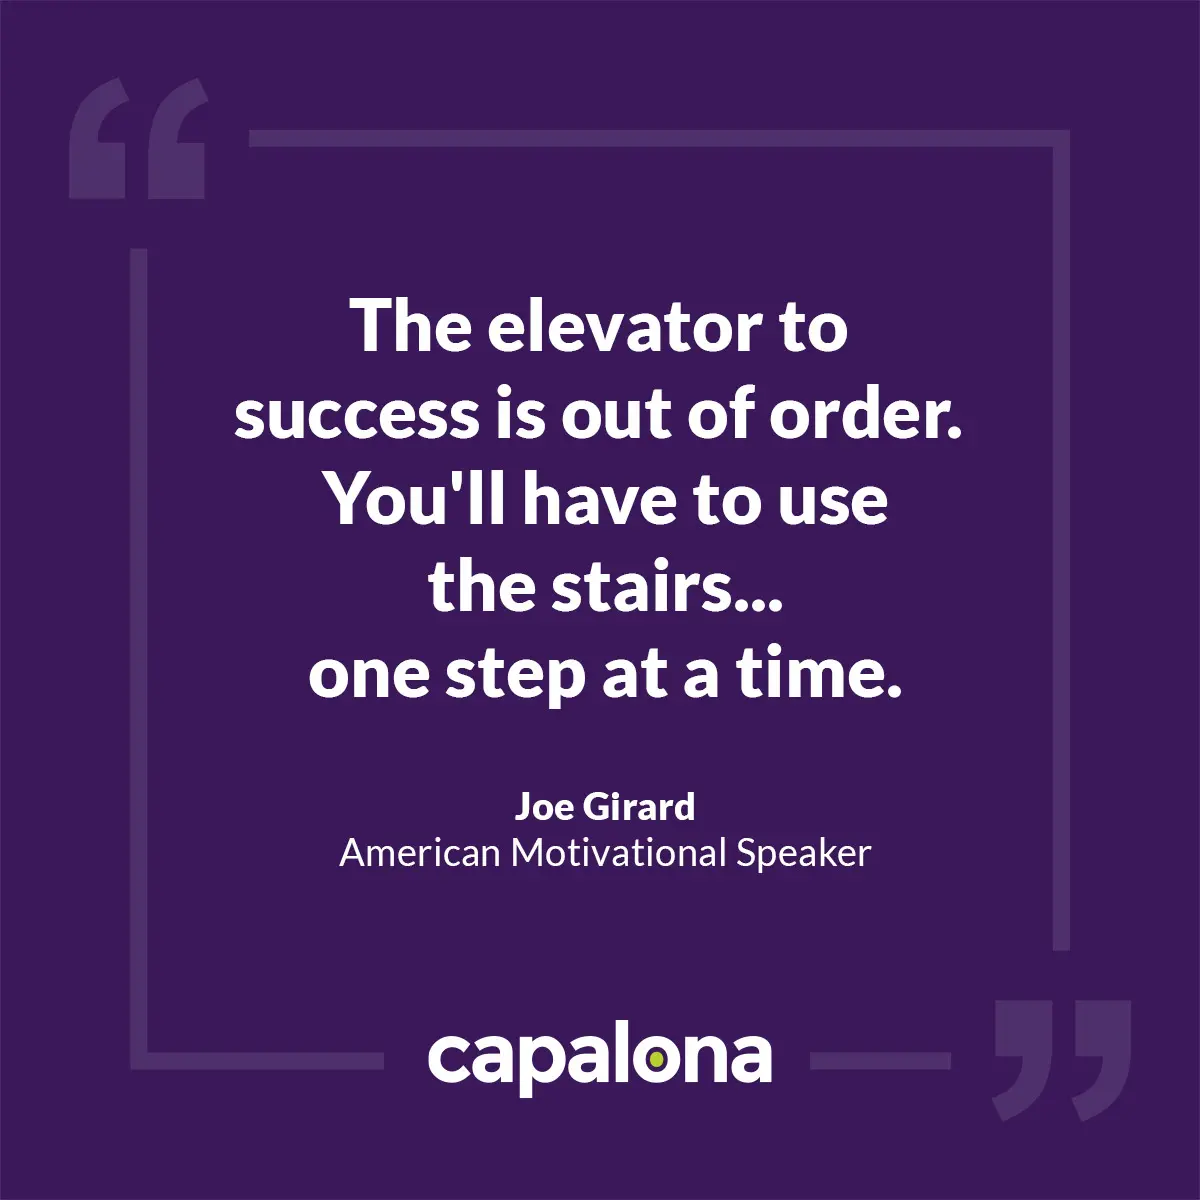 The elevator to success is out of order. You'll have to use the stairs... one step at a time — Joe Girard, American Motivational Speaker